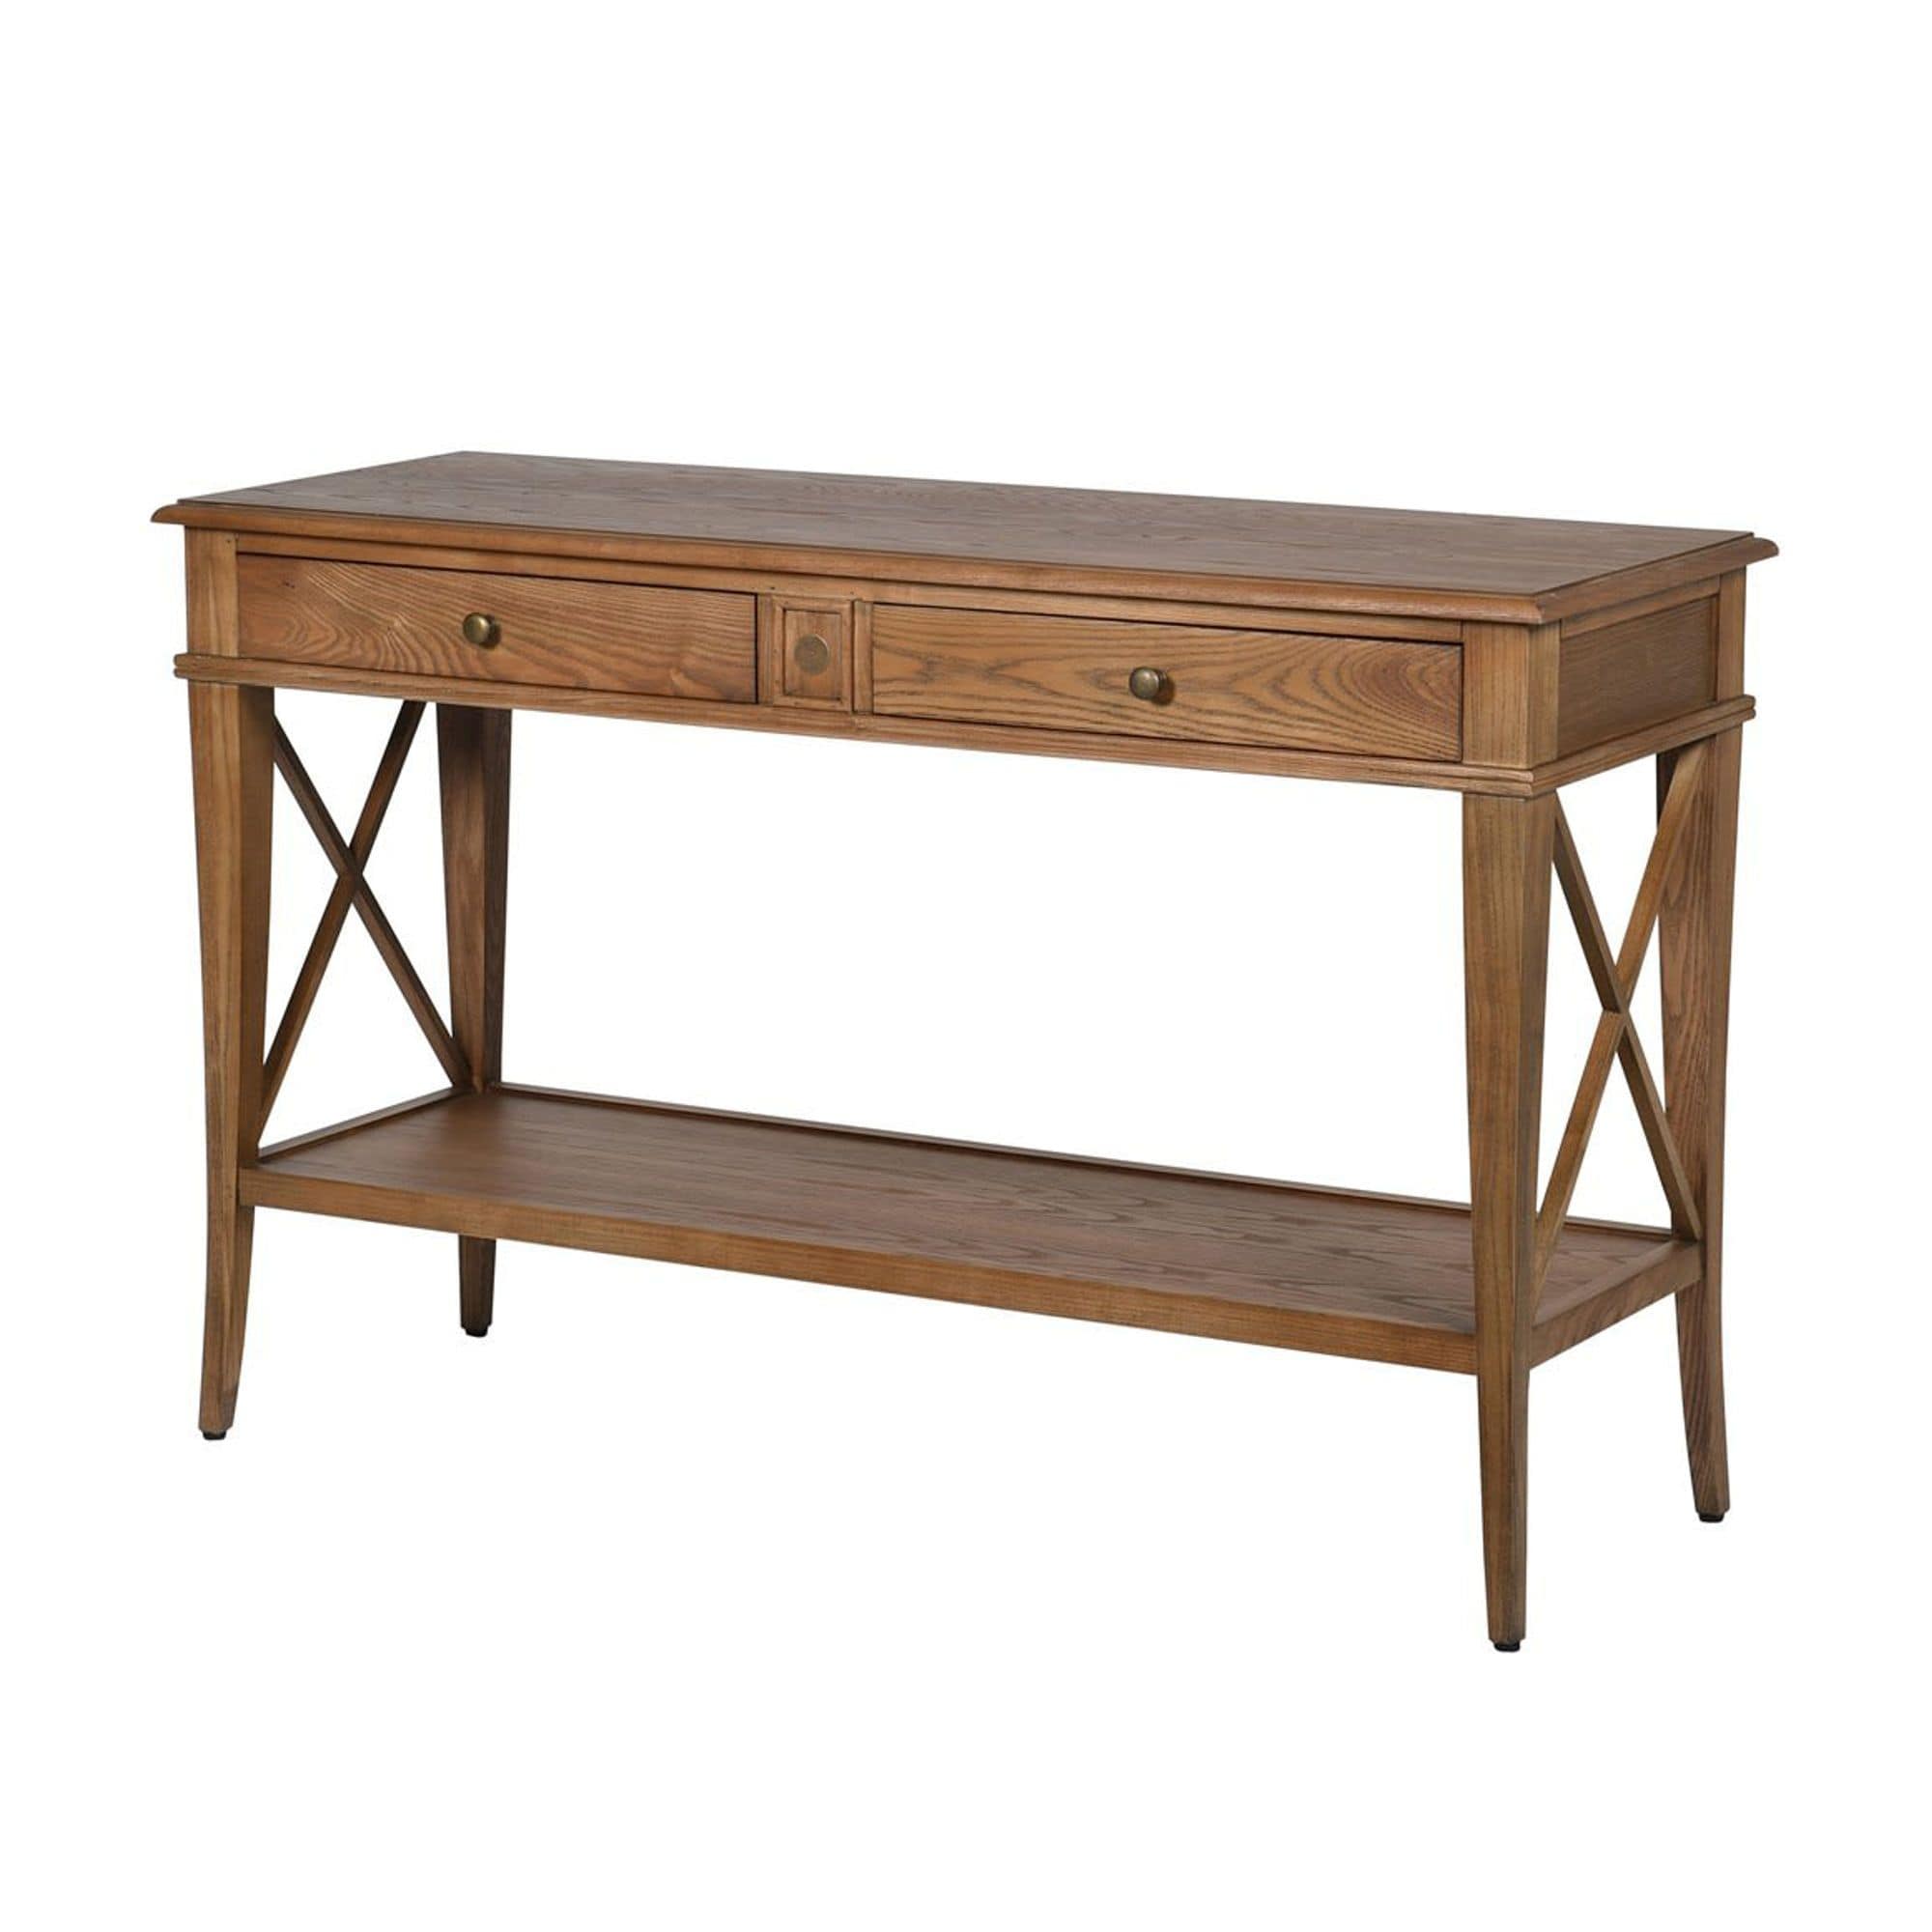 Classic Cross-Side Console Table - escapologyhome.co.uk